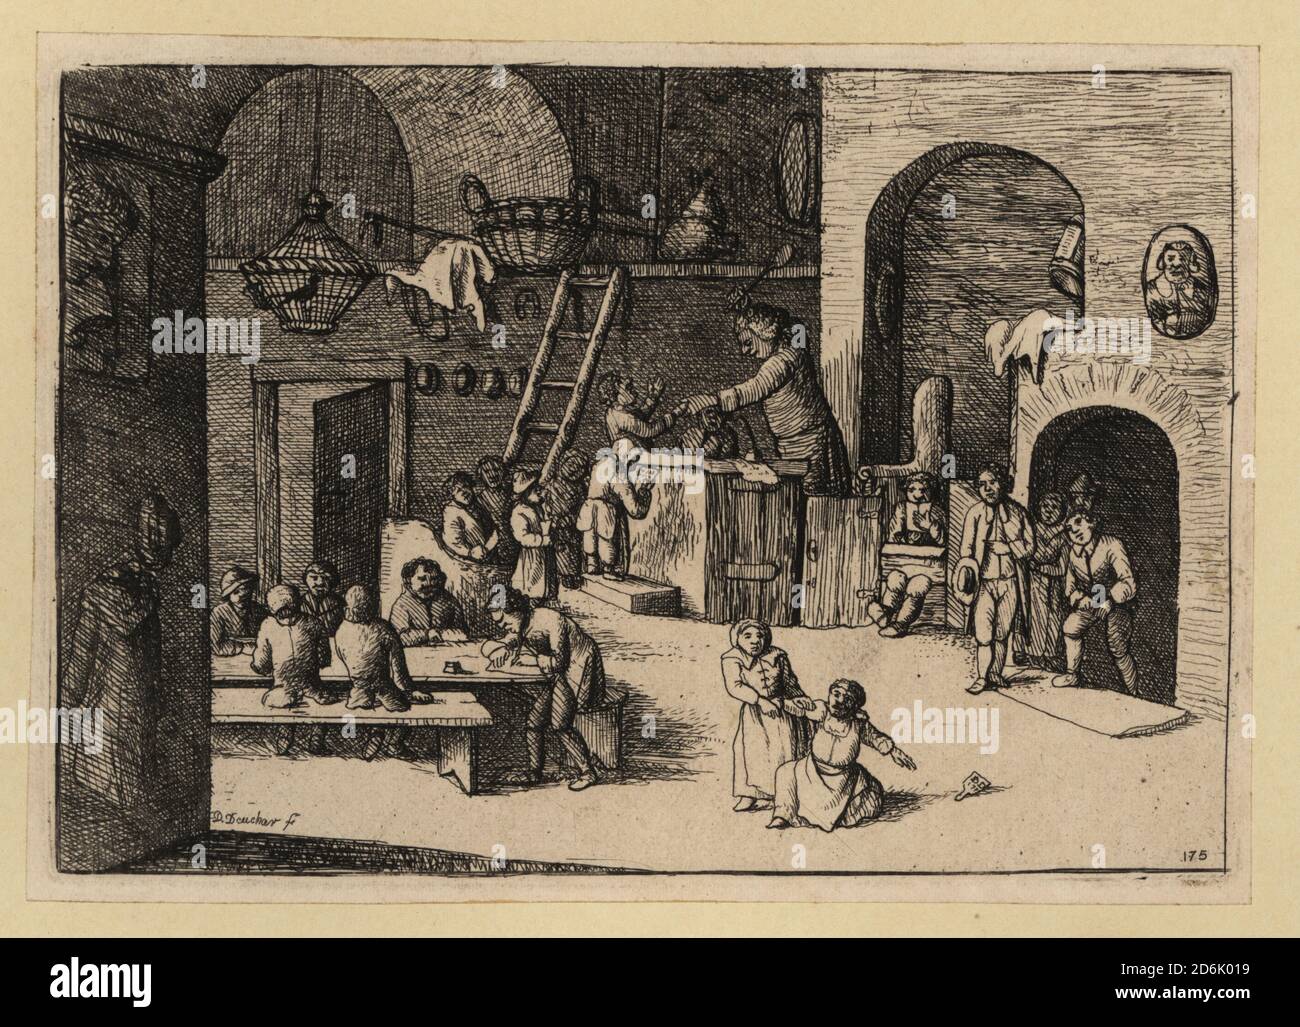 European school scene from the 17th century. A tutor beats a child with a wooden spoon from a pulpit, a child sits in the stocks, a girl pulls on another’s arms, others sits writing at a table. Copperplate engraving by David Deuchar from A Collection of Etchings after the most Eminent Masters of the Dutch and Flemish Schools, Edinburgh, 1803. Stock Photo